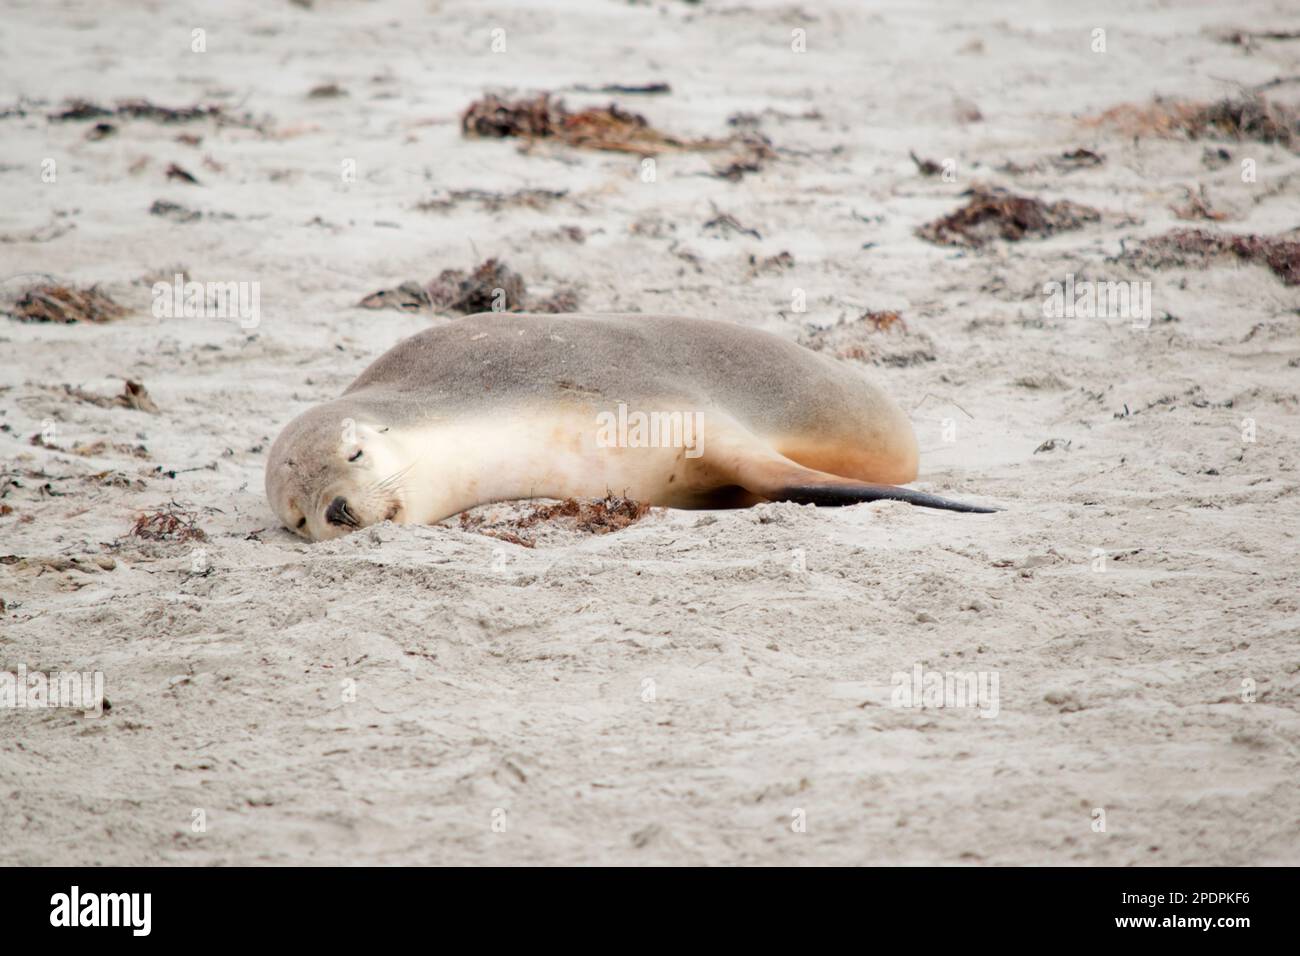 the sea lion pu[ is resting at seal bay Stock Photo